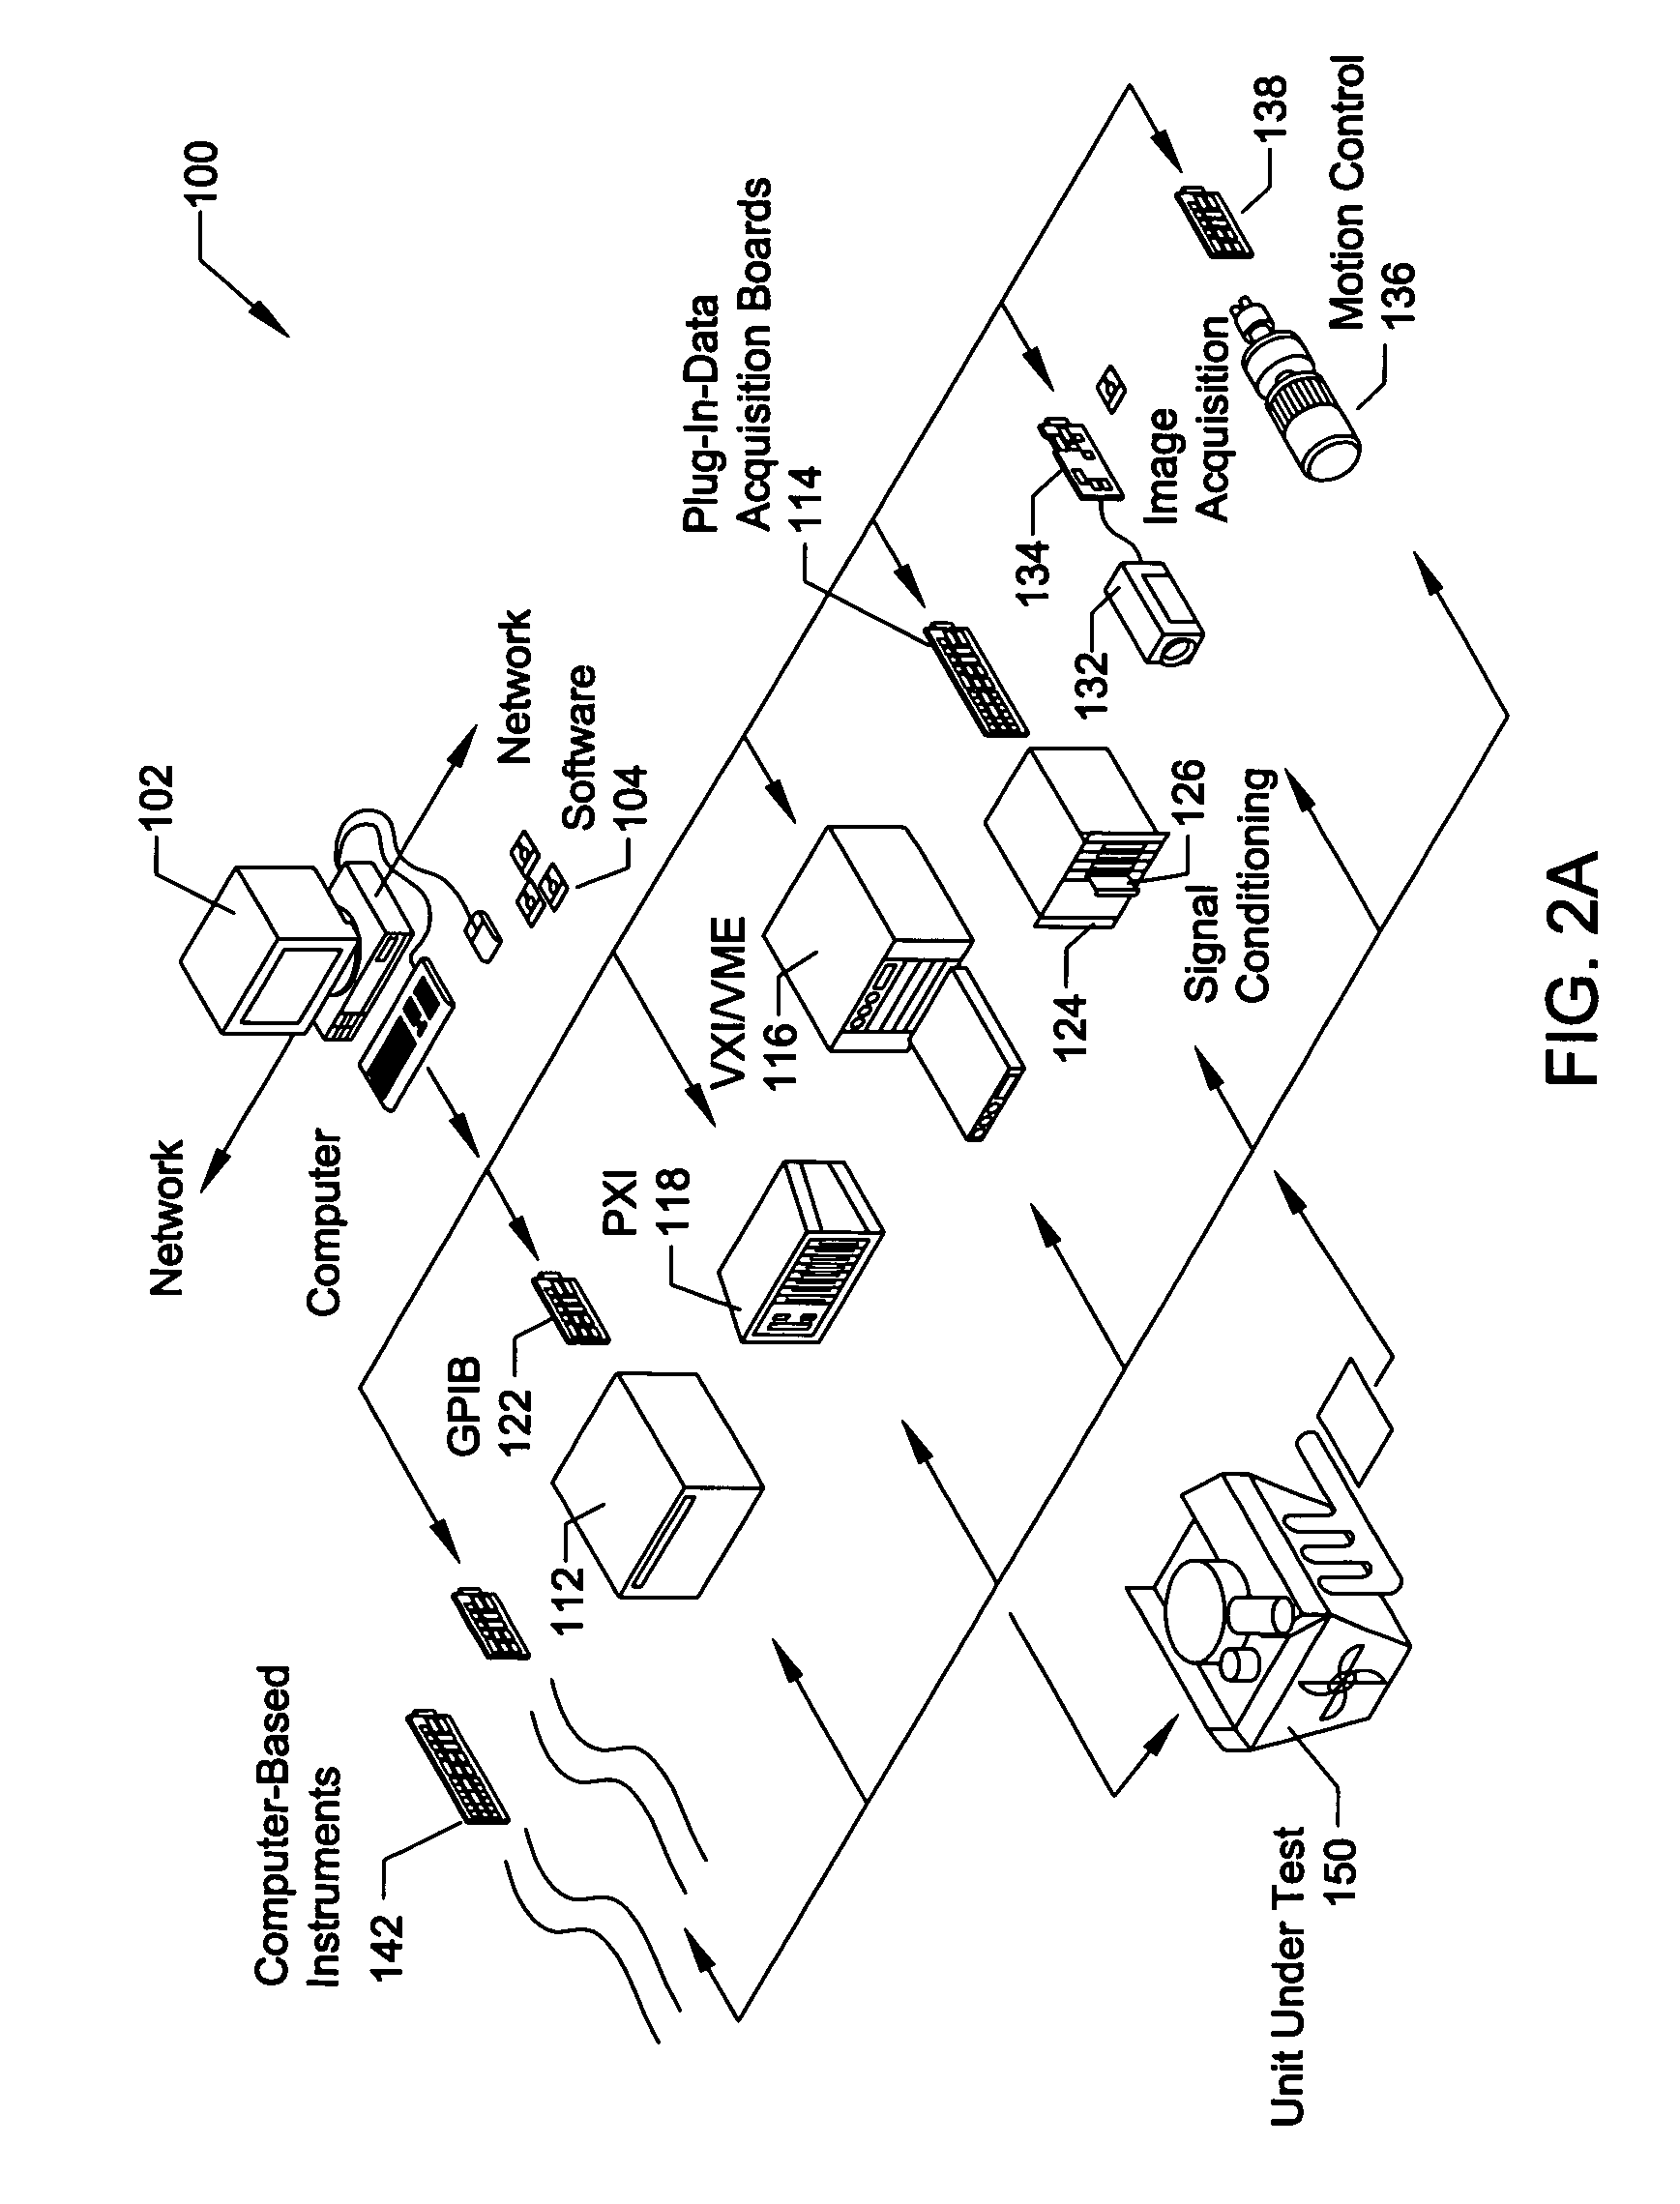 System and method for programmatically modifying a graphical program in response to program information